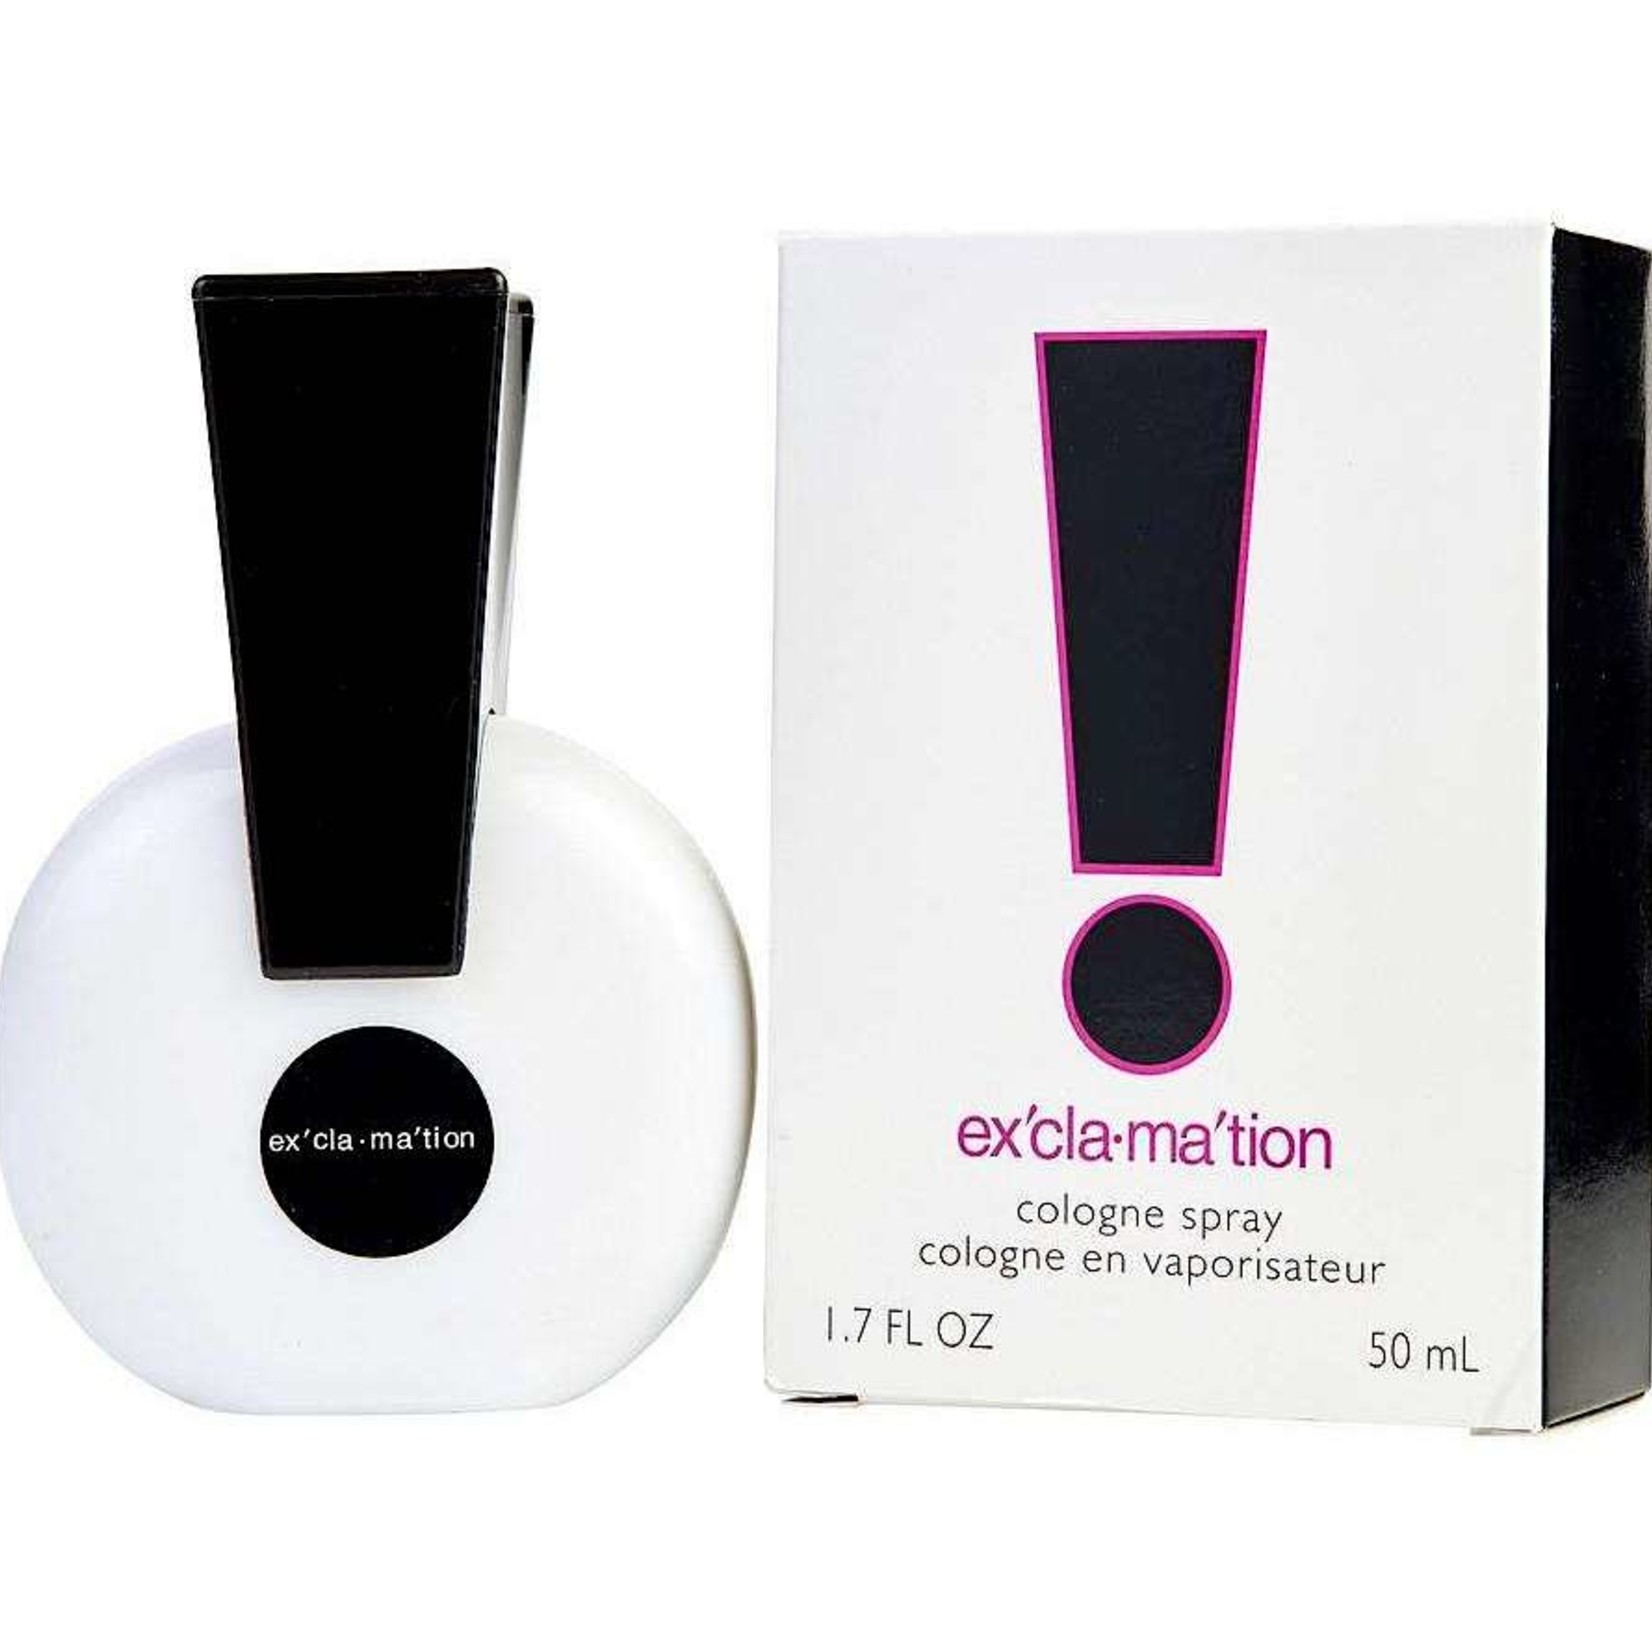 Coty Exclamation Cologne Spray